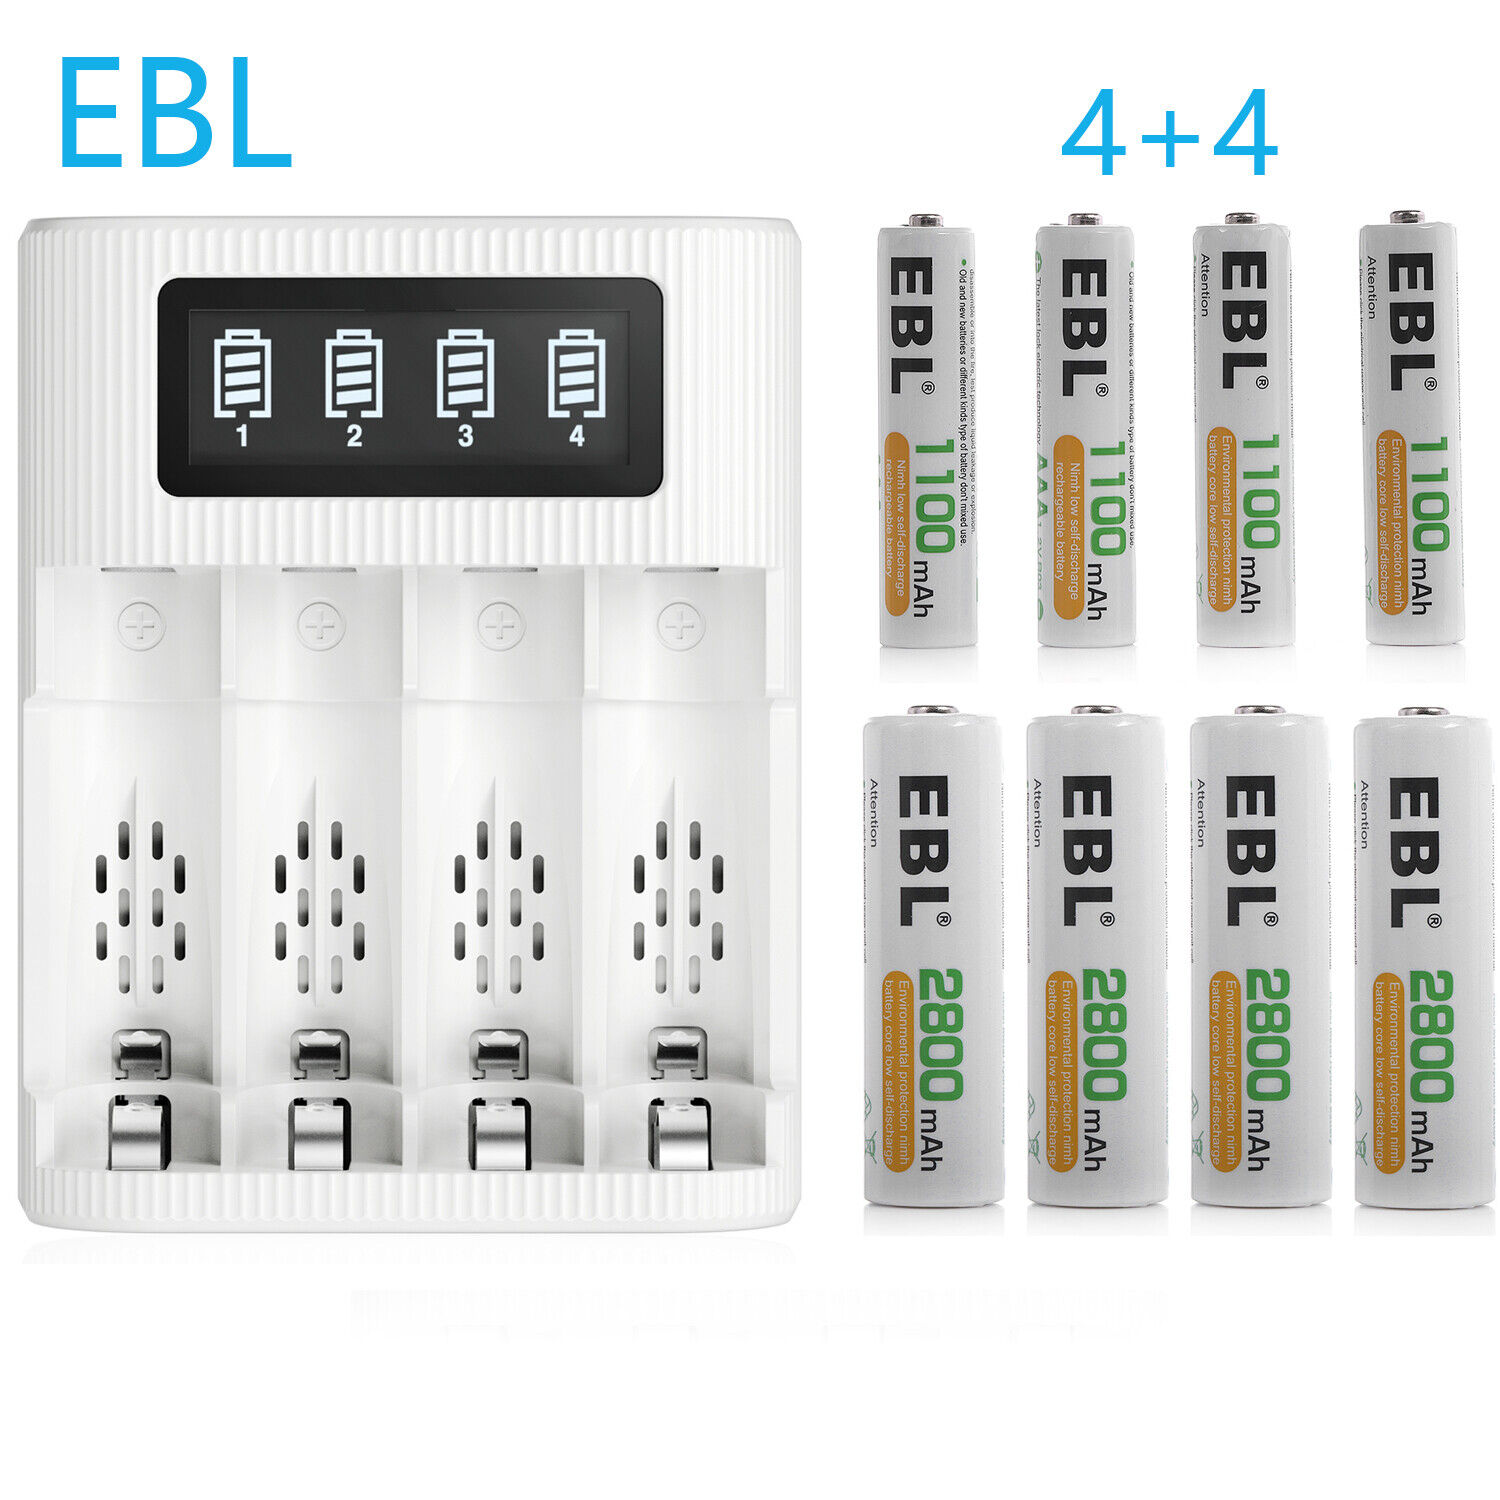 EBL AA AAA Rechargeable Batteries （4* AA + 4* AAA ) 1.2V w/ LCD Battery Charger